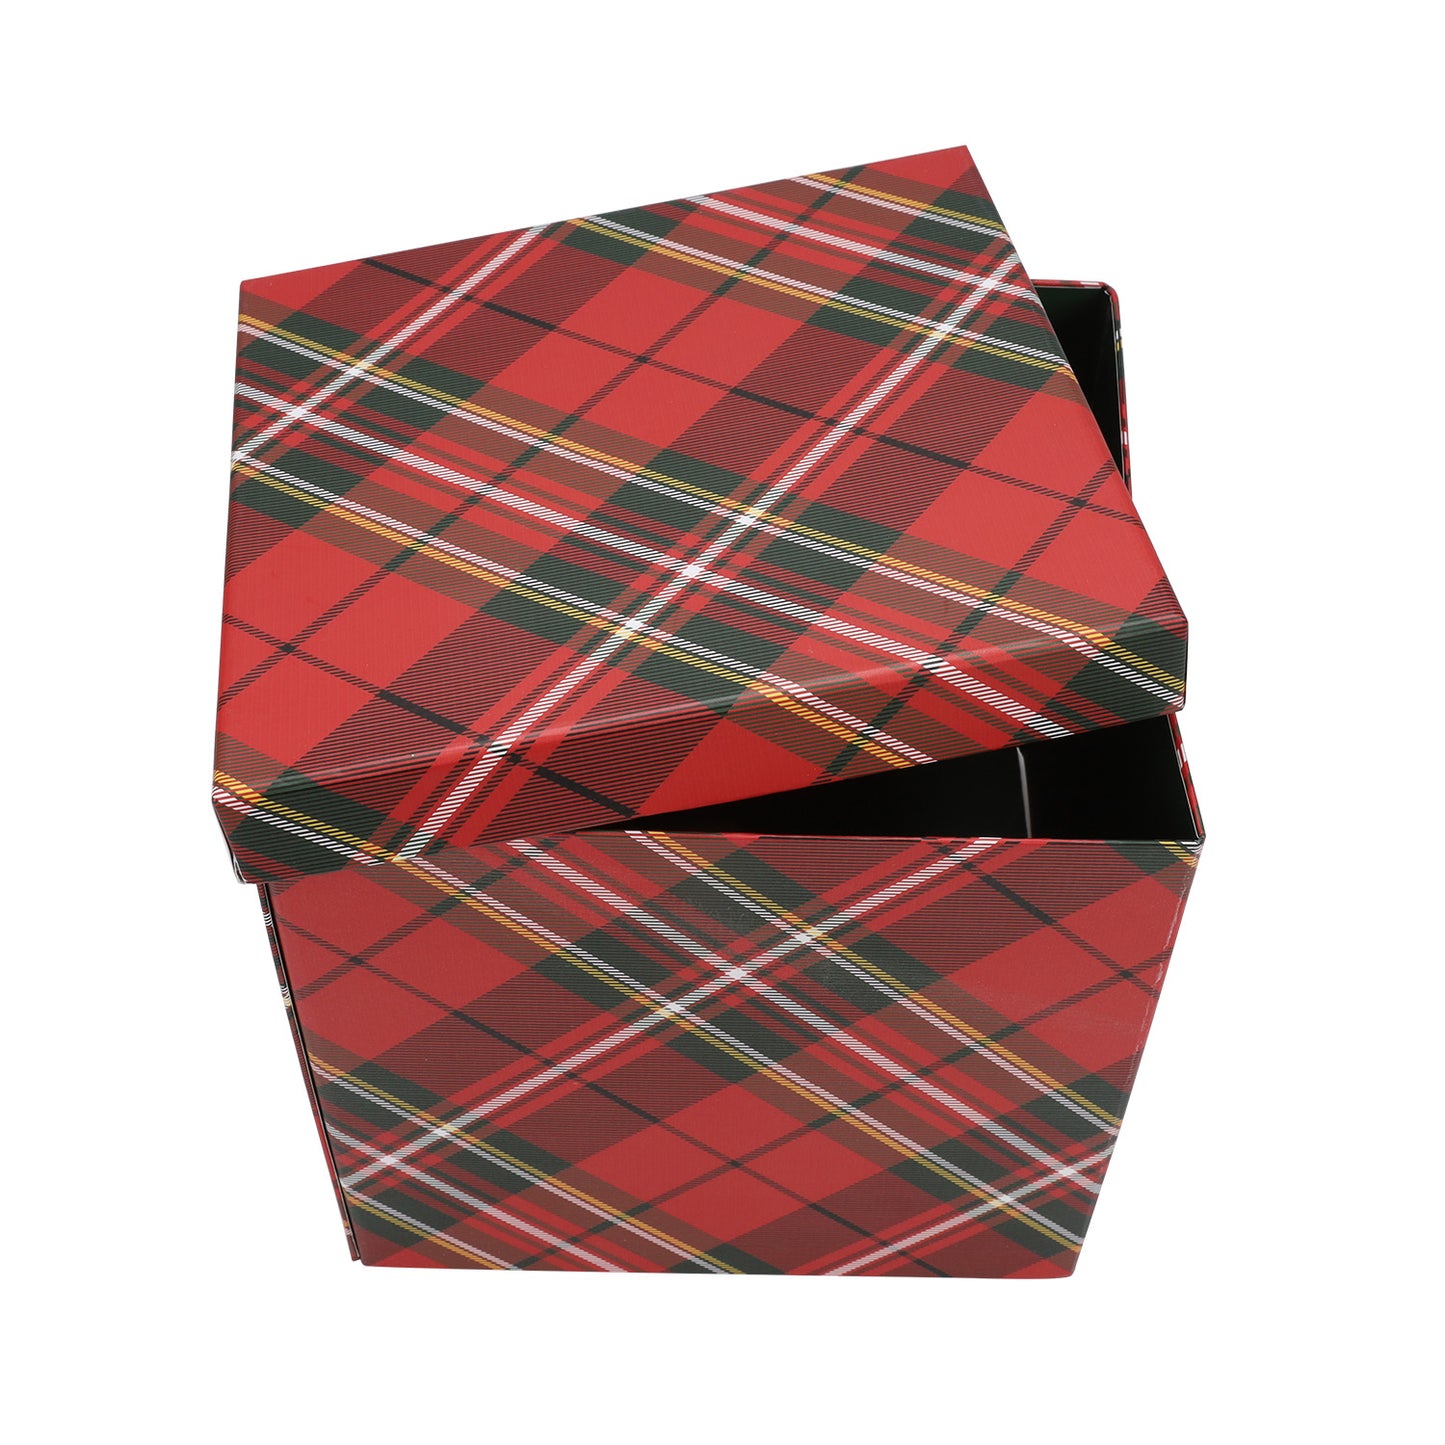 WRAPLA 23X23X23CM Christmas Gift Box with Lid Red Buffalo Plaid design for Party, Wedding, Gift Wrap, Bridesmaid Proposal, Storage